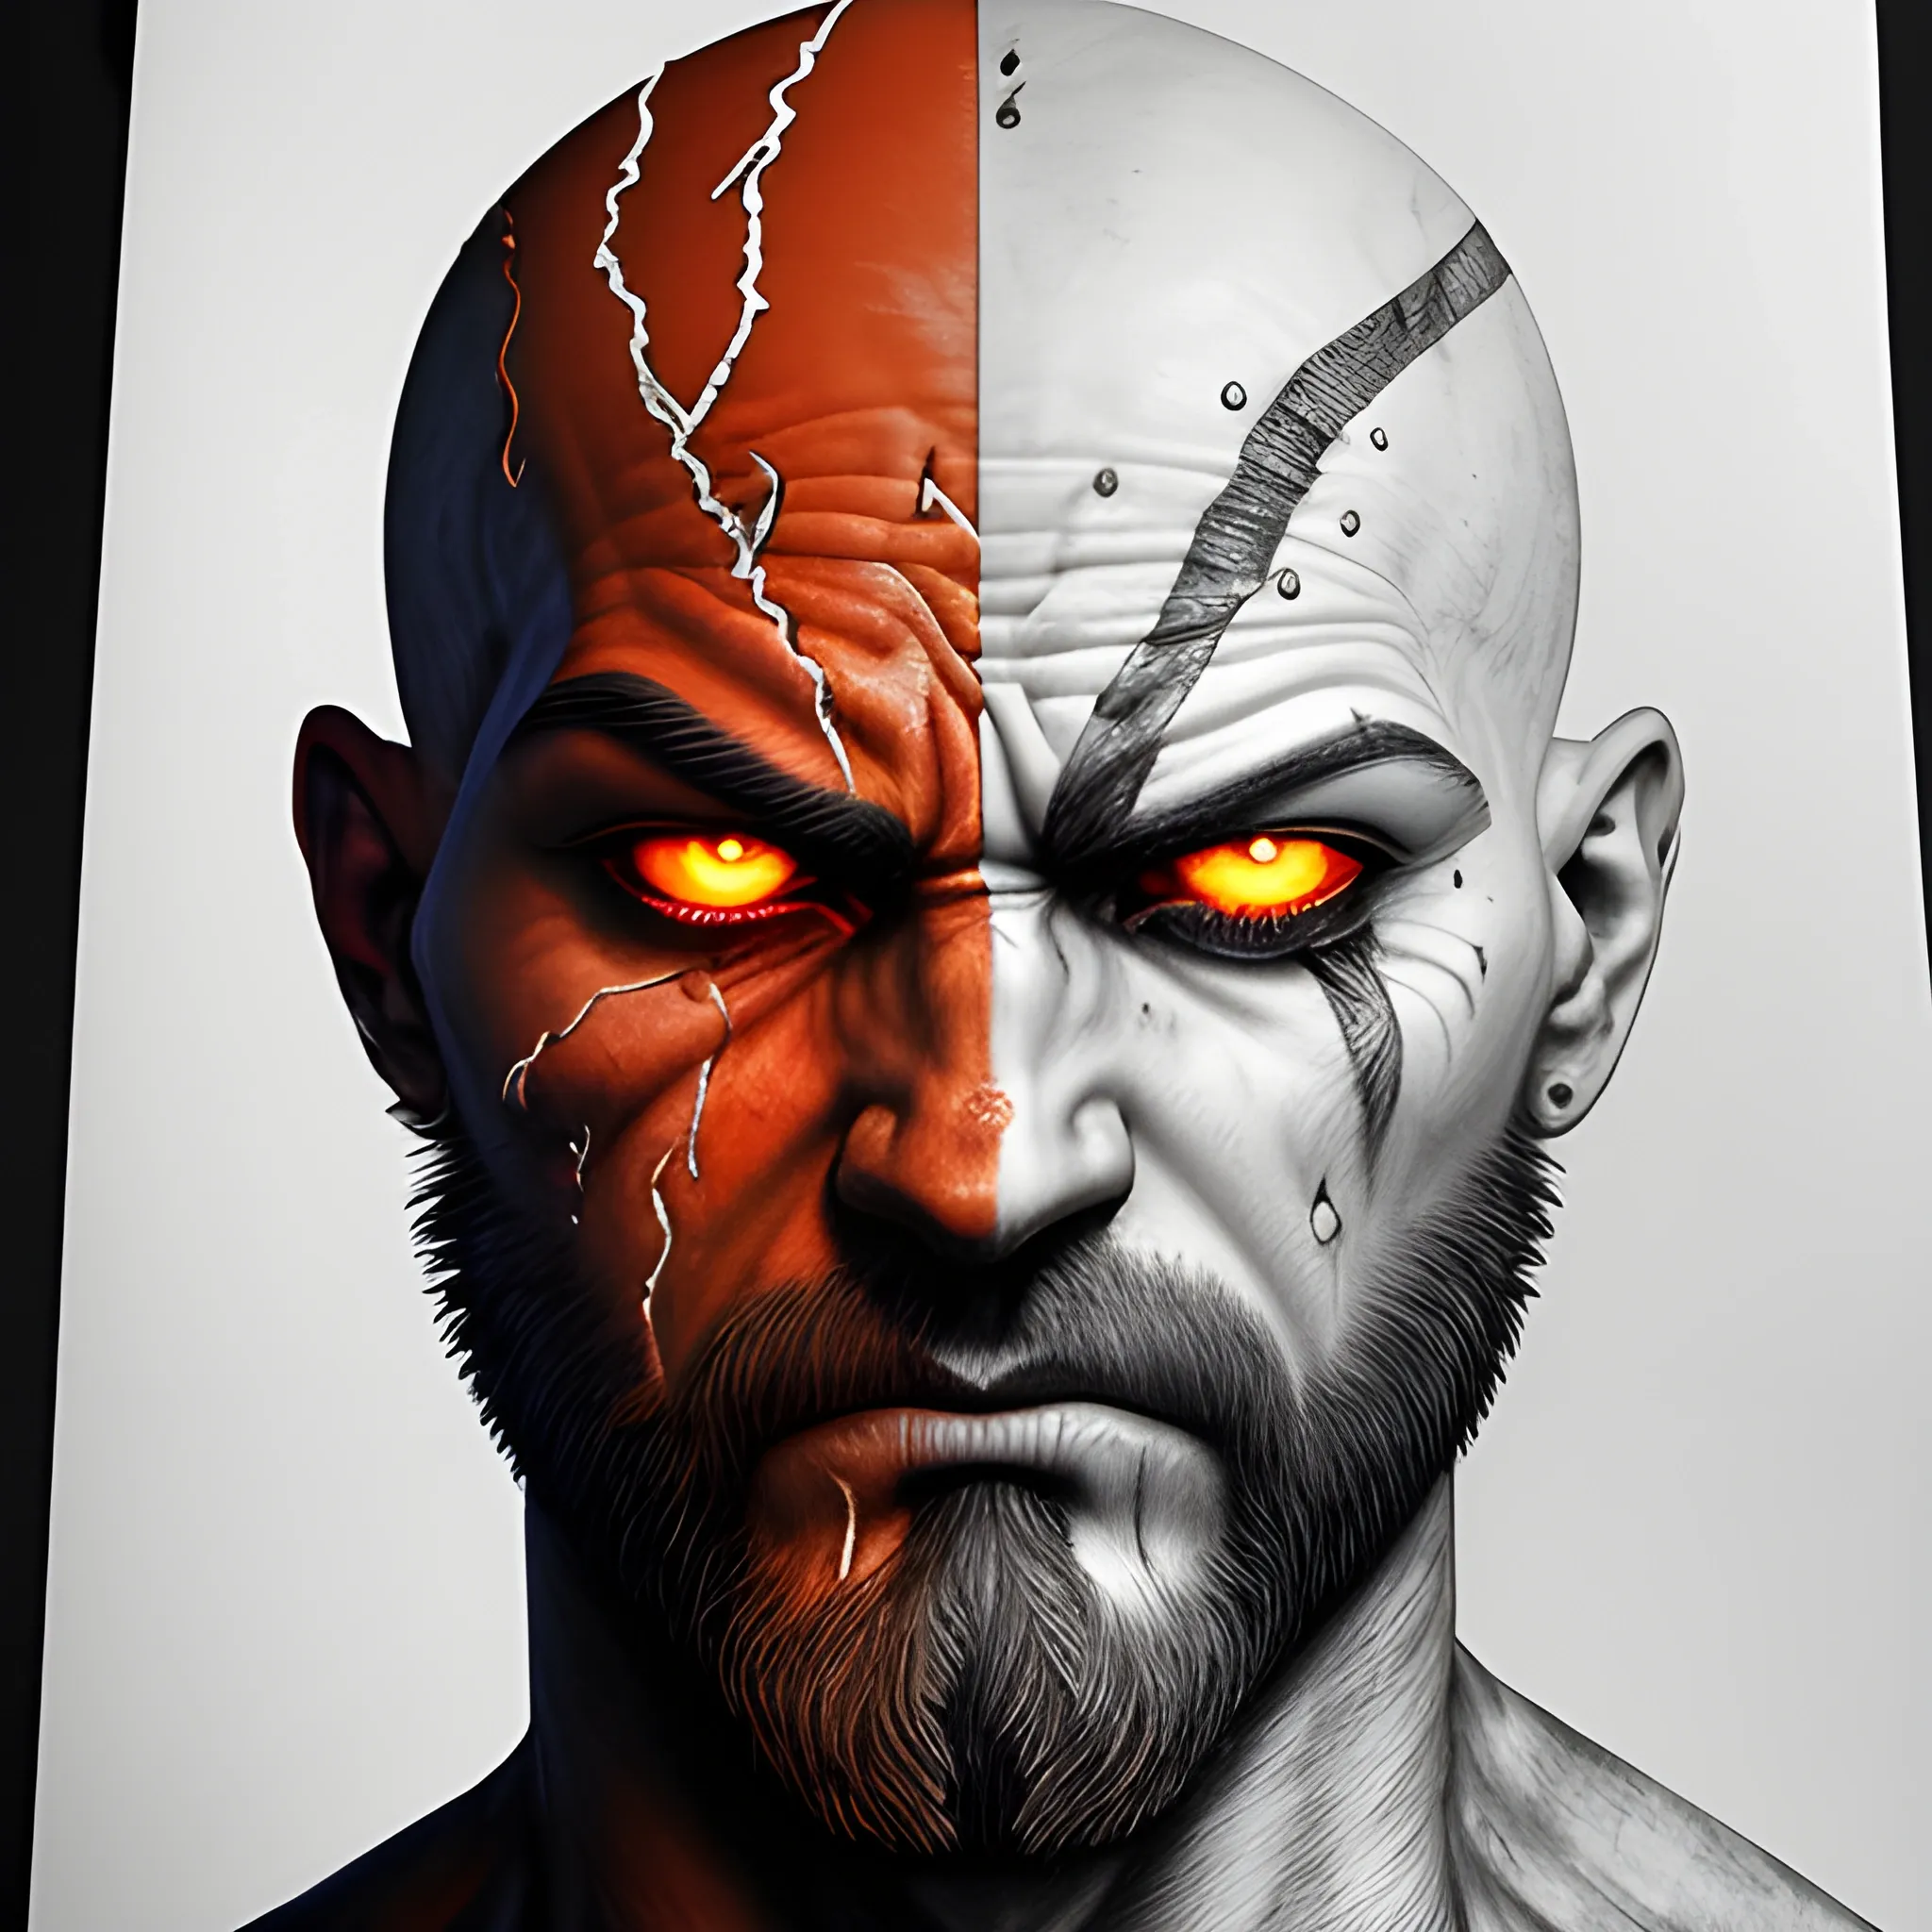 In this intense long-up, Kratos, the Spartan warrior, bears the unmistakable marks of unbridled anger. His battle-hardened face is etched with scars and a furrowed brow that cast a formidable shadow over his piercing, wrathful eyes. Veins pulse beneath his skin as his clenched jaw reveals the resolve within. Sweat and dirt streak his weathered skin, mirroring the toll of countless battles. The fiery backdrop mirrors the tumultuous storm within him. Kratos' visage, a portrait of rage, resonates with the relentless pursuit of vengeance, creating a gripping image of primal fury., Trippy, Pencil Sketch, Trippy